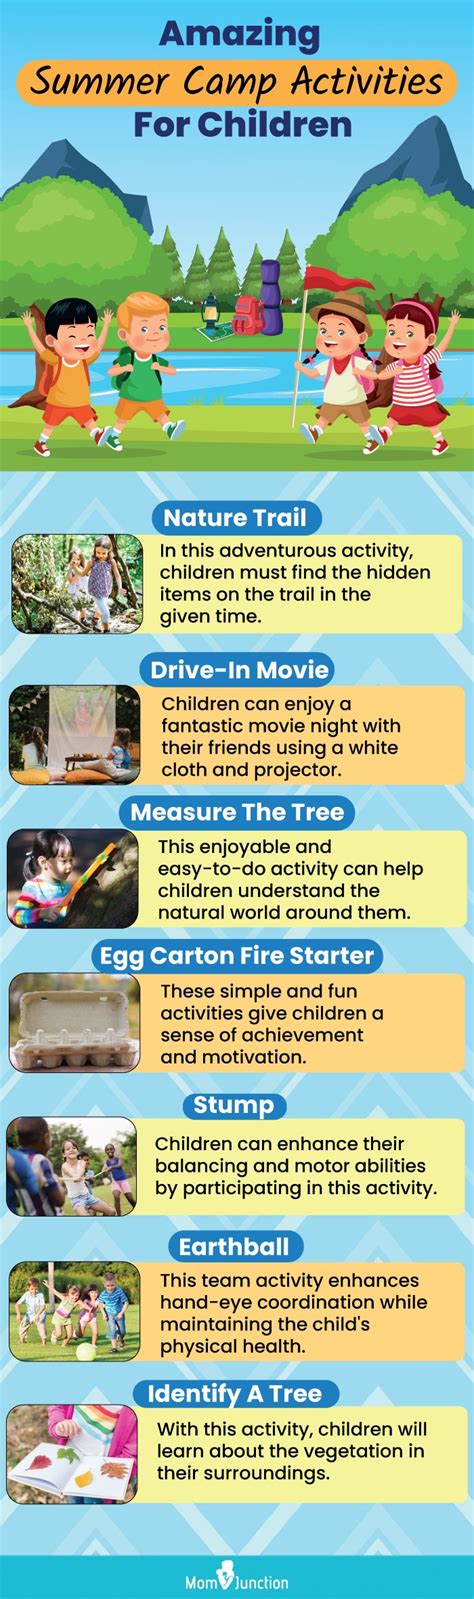 10 Wonderful Summer Camp Activities For Kids Of All Ages 万博客户端手机版